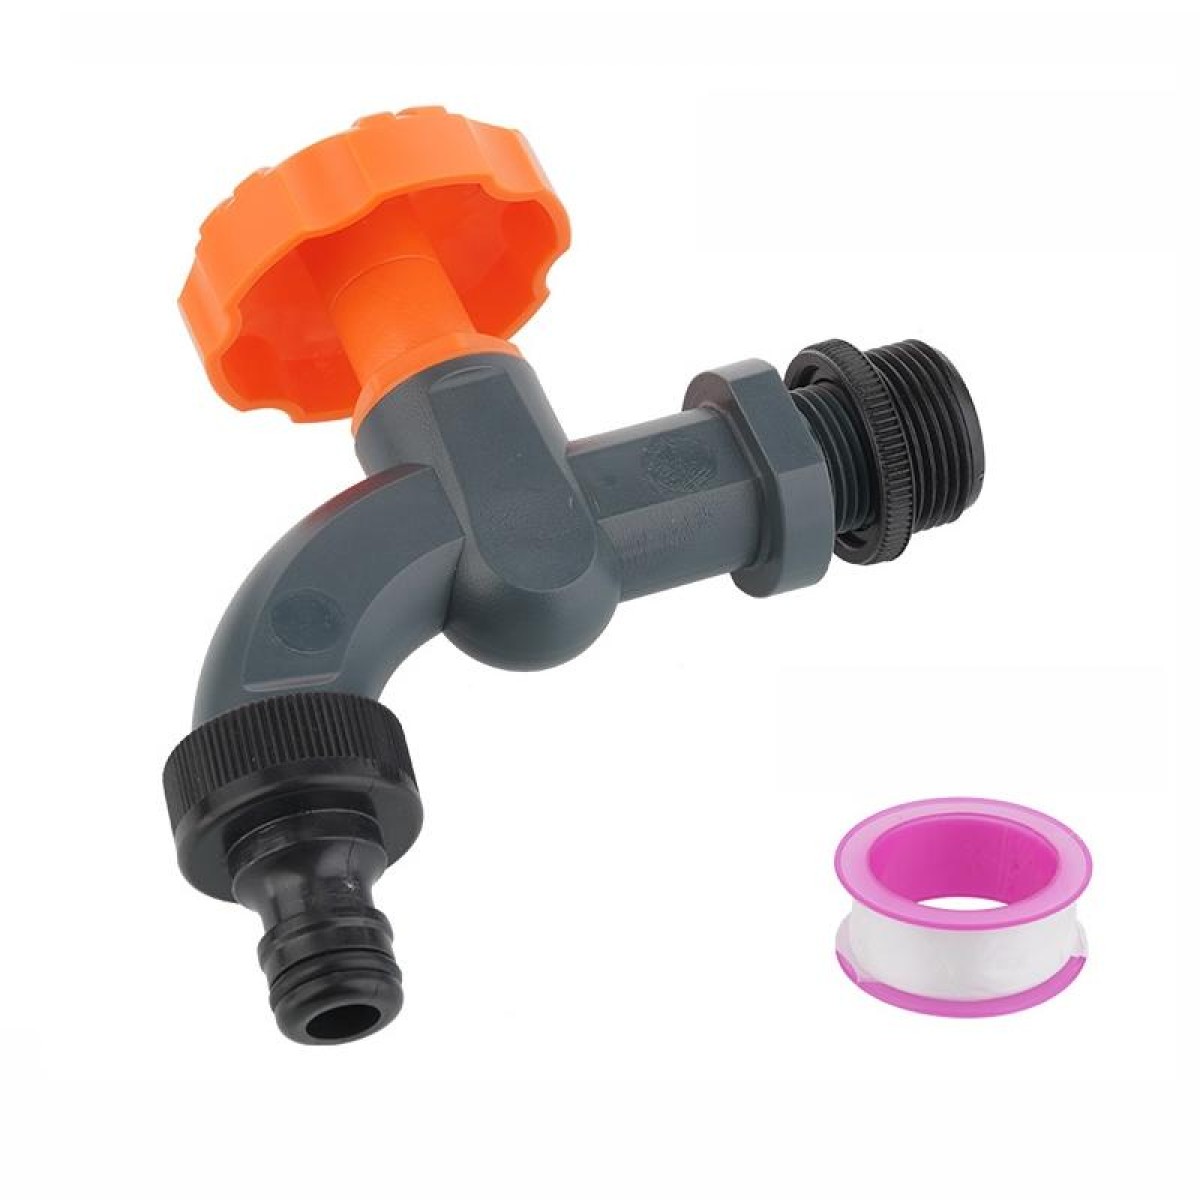 Outdoor Garden Connector Courtyard Valve Switch Faucet, Specification: With 6 Point Pacifier+Double Thread